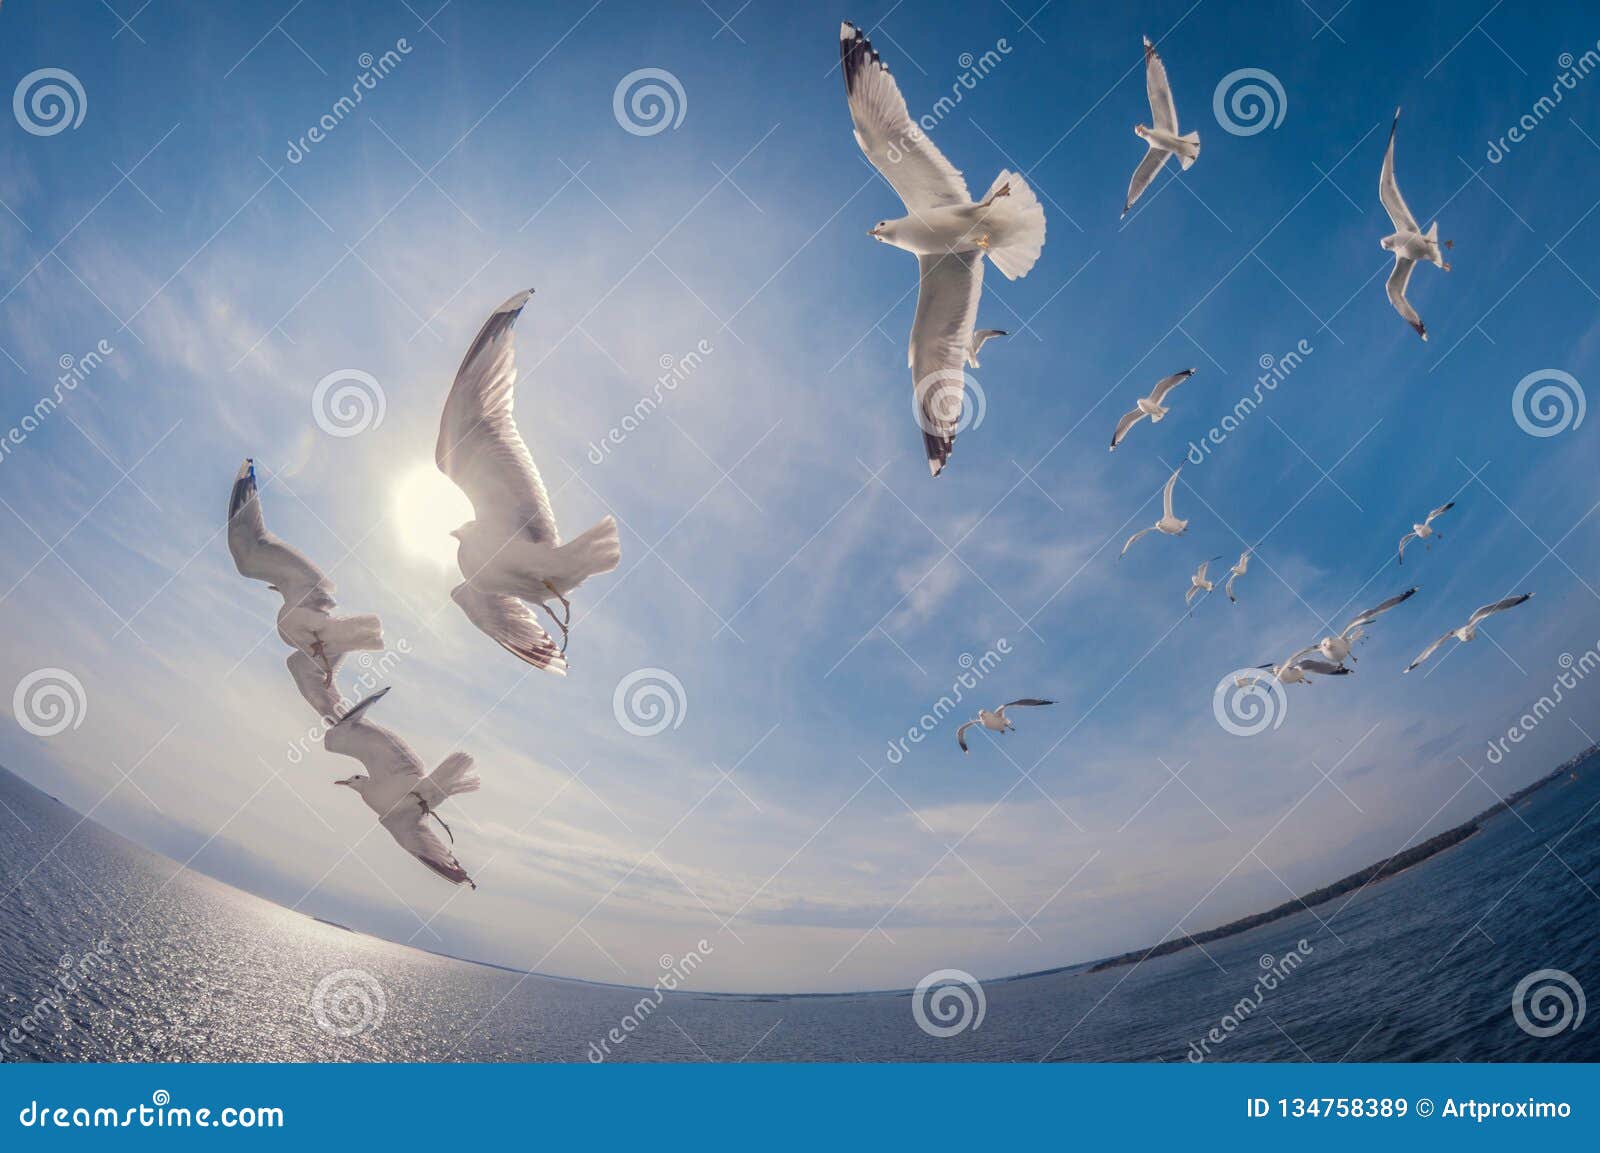 Download Flock Of Seagulls Flying Over The Sea With A Background Of Blue Sky, Fisheye Distortion Stock ...